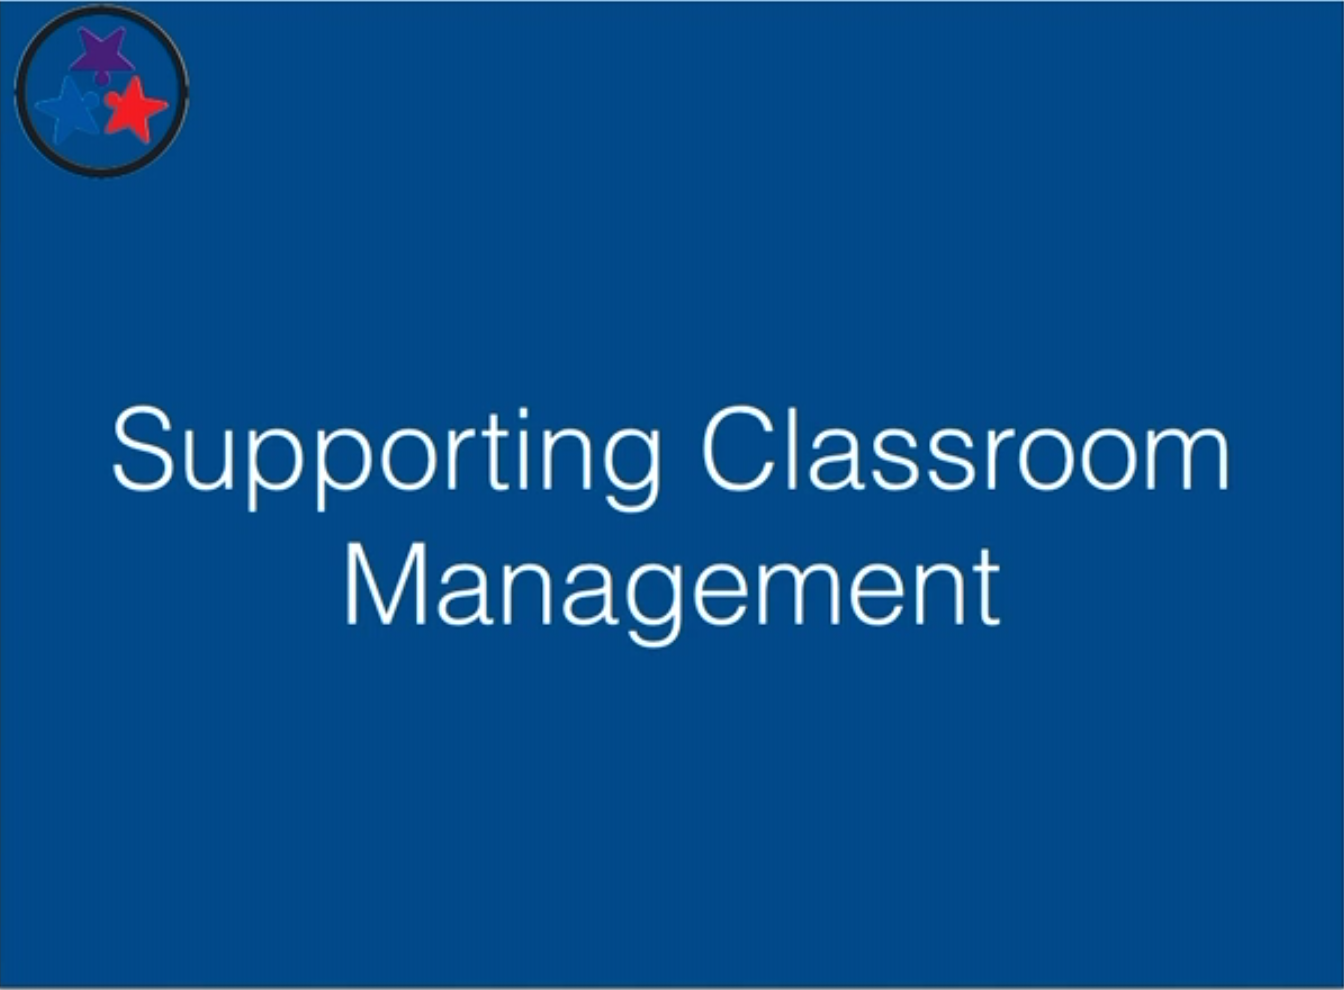 Classroom Management 2 - Supporting Classroom Management